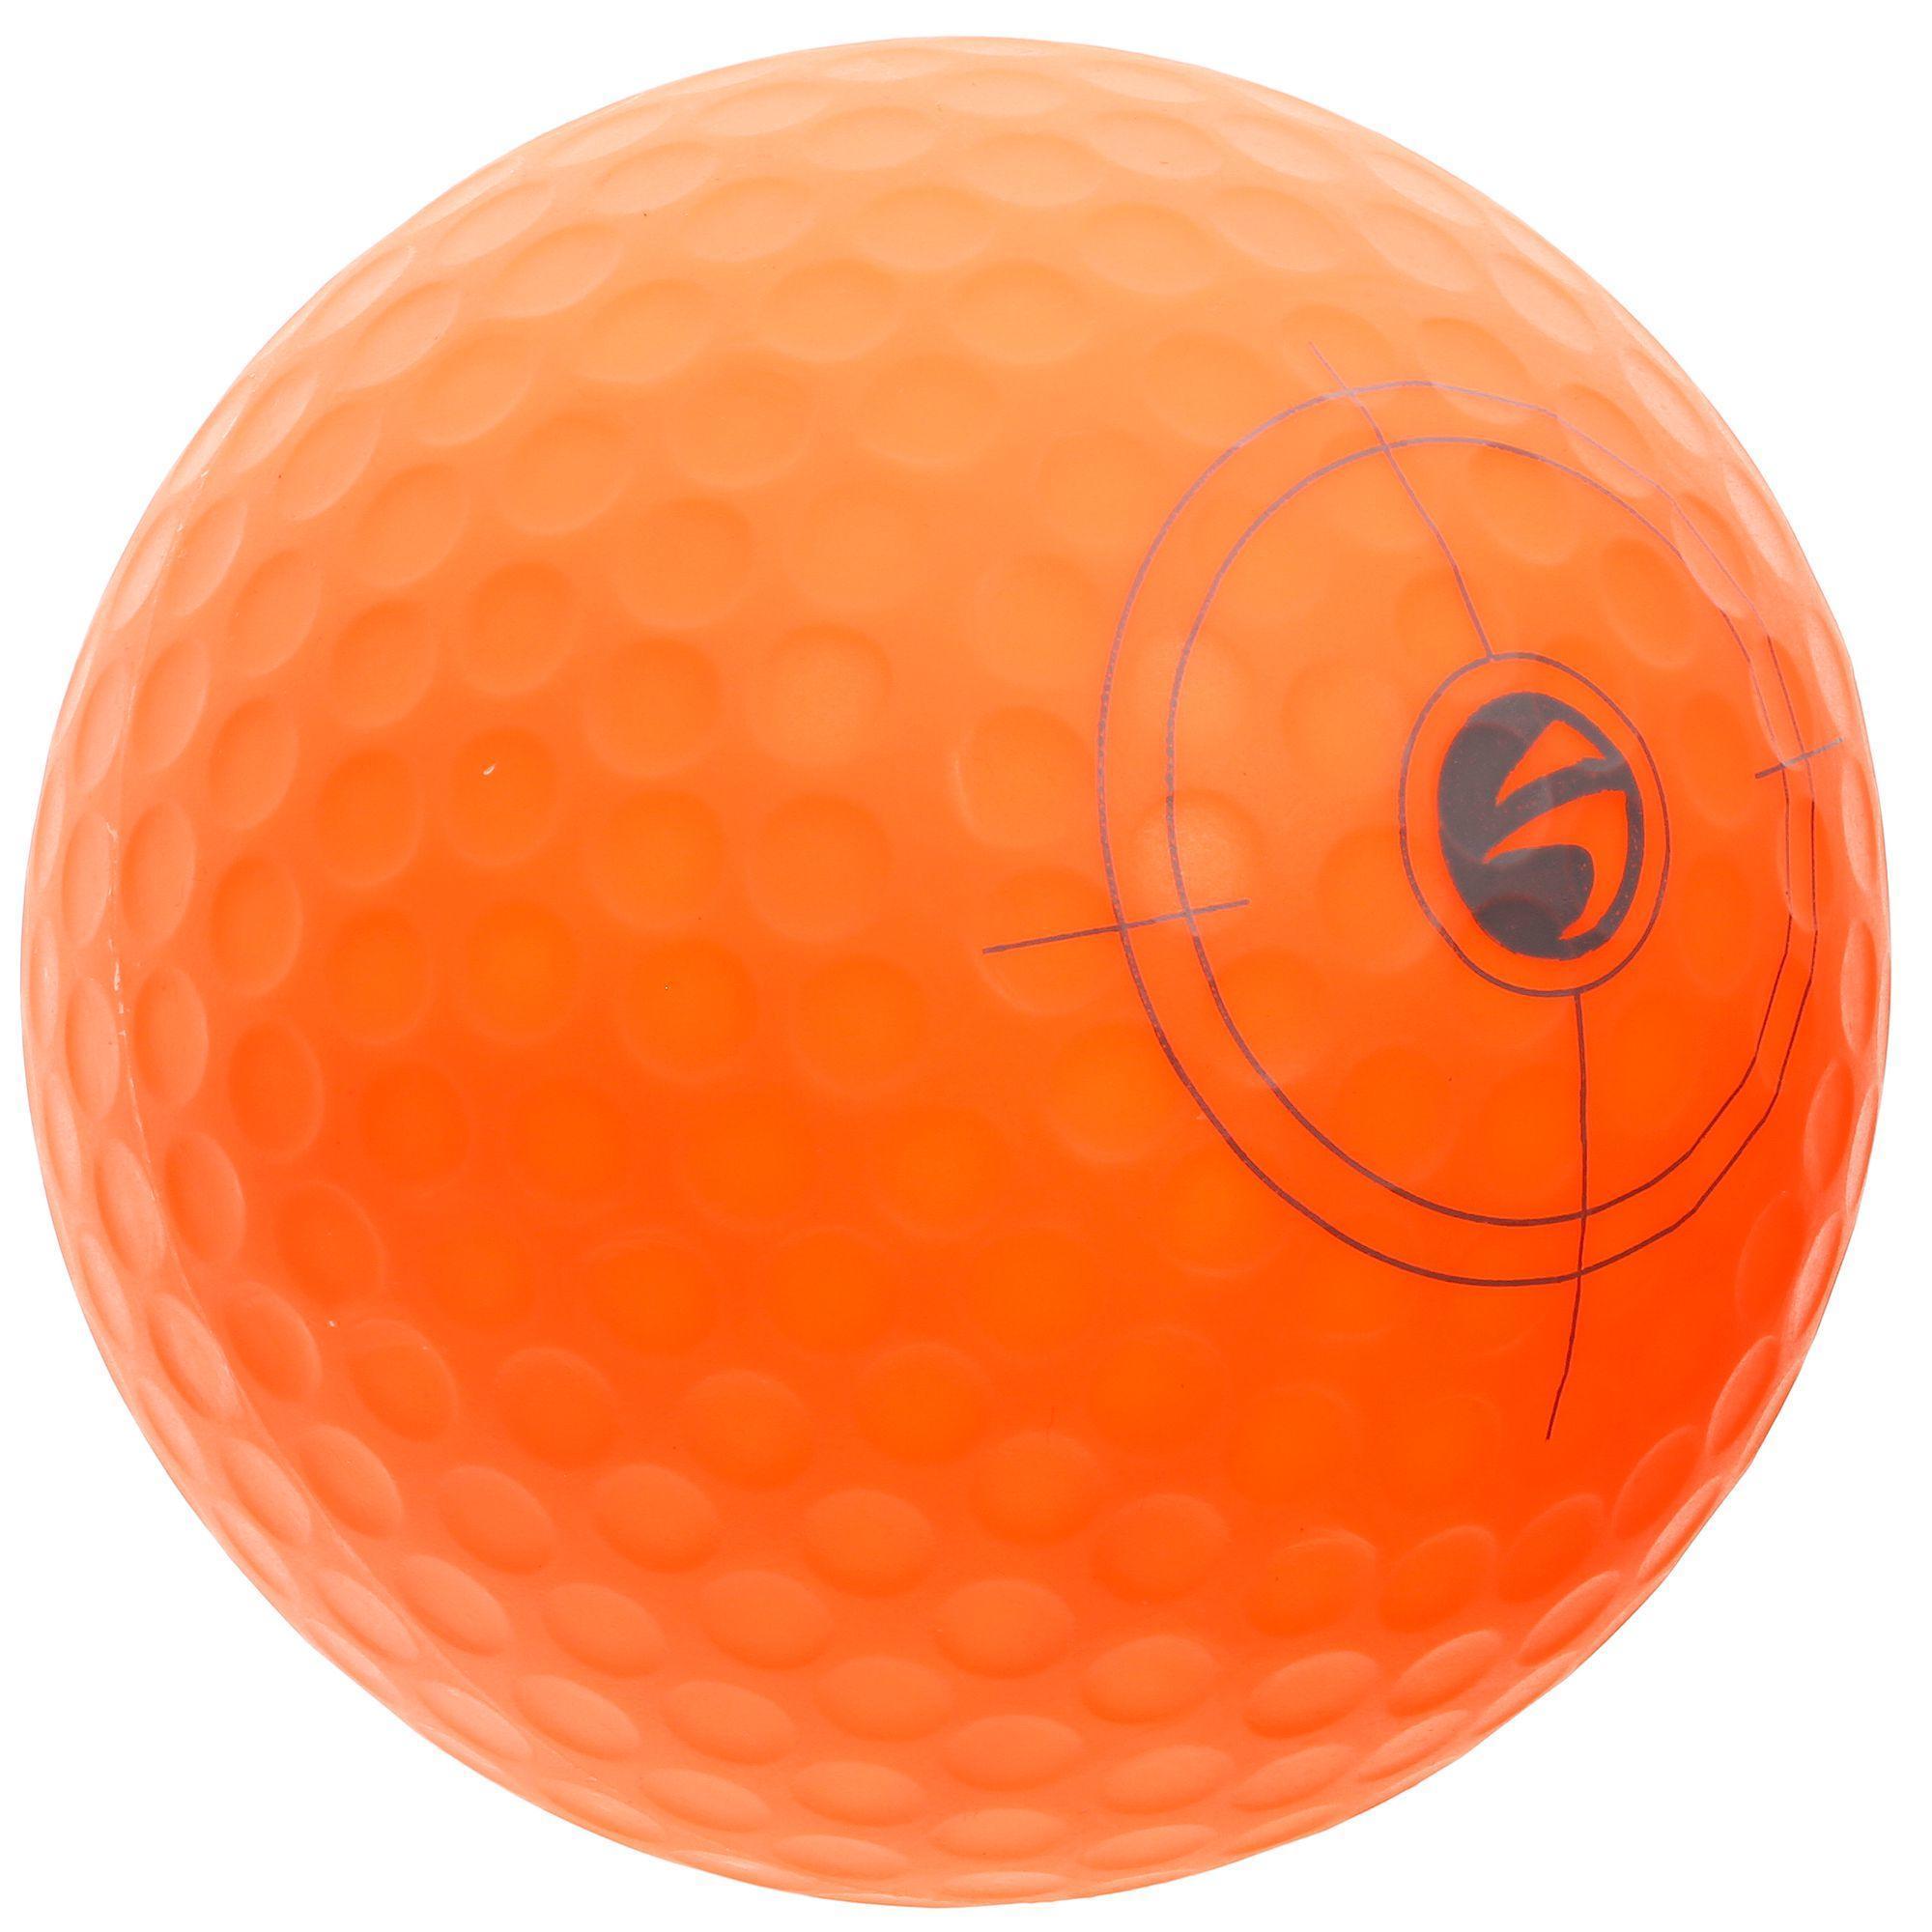 INESIS Balle Gonflable Golf Enfant - Inesis